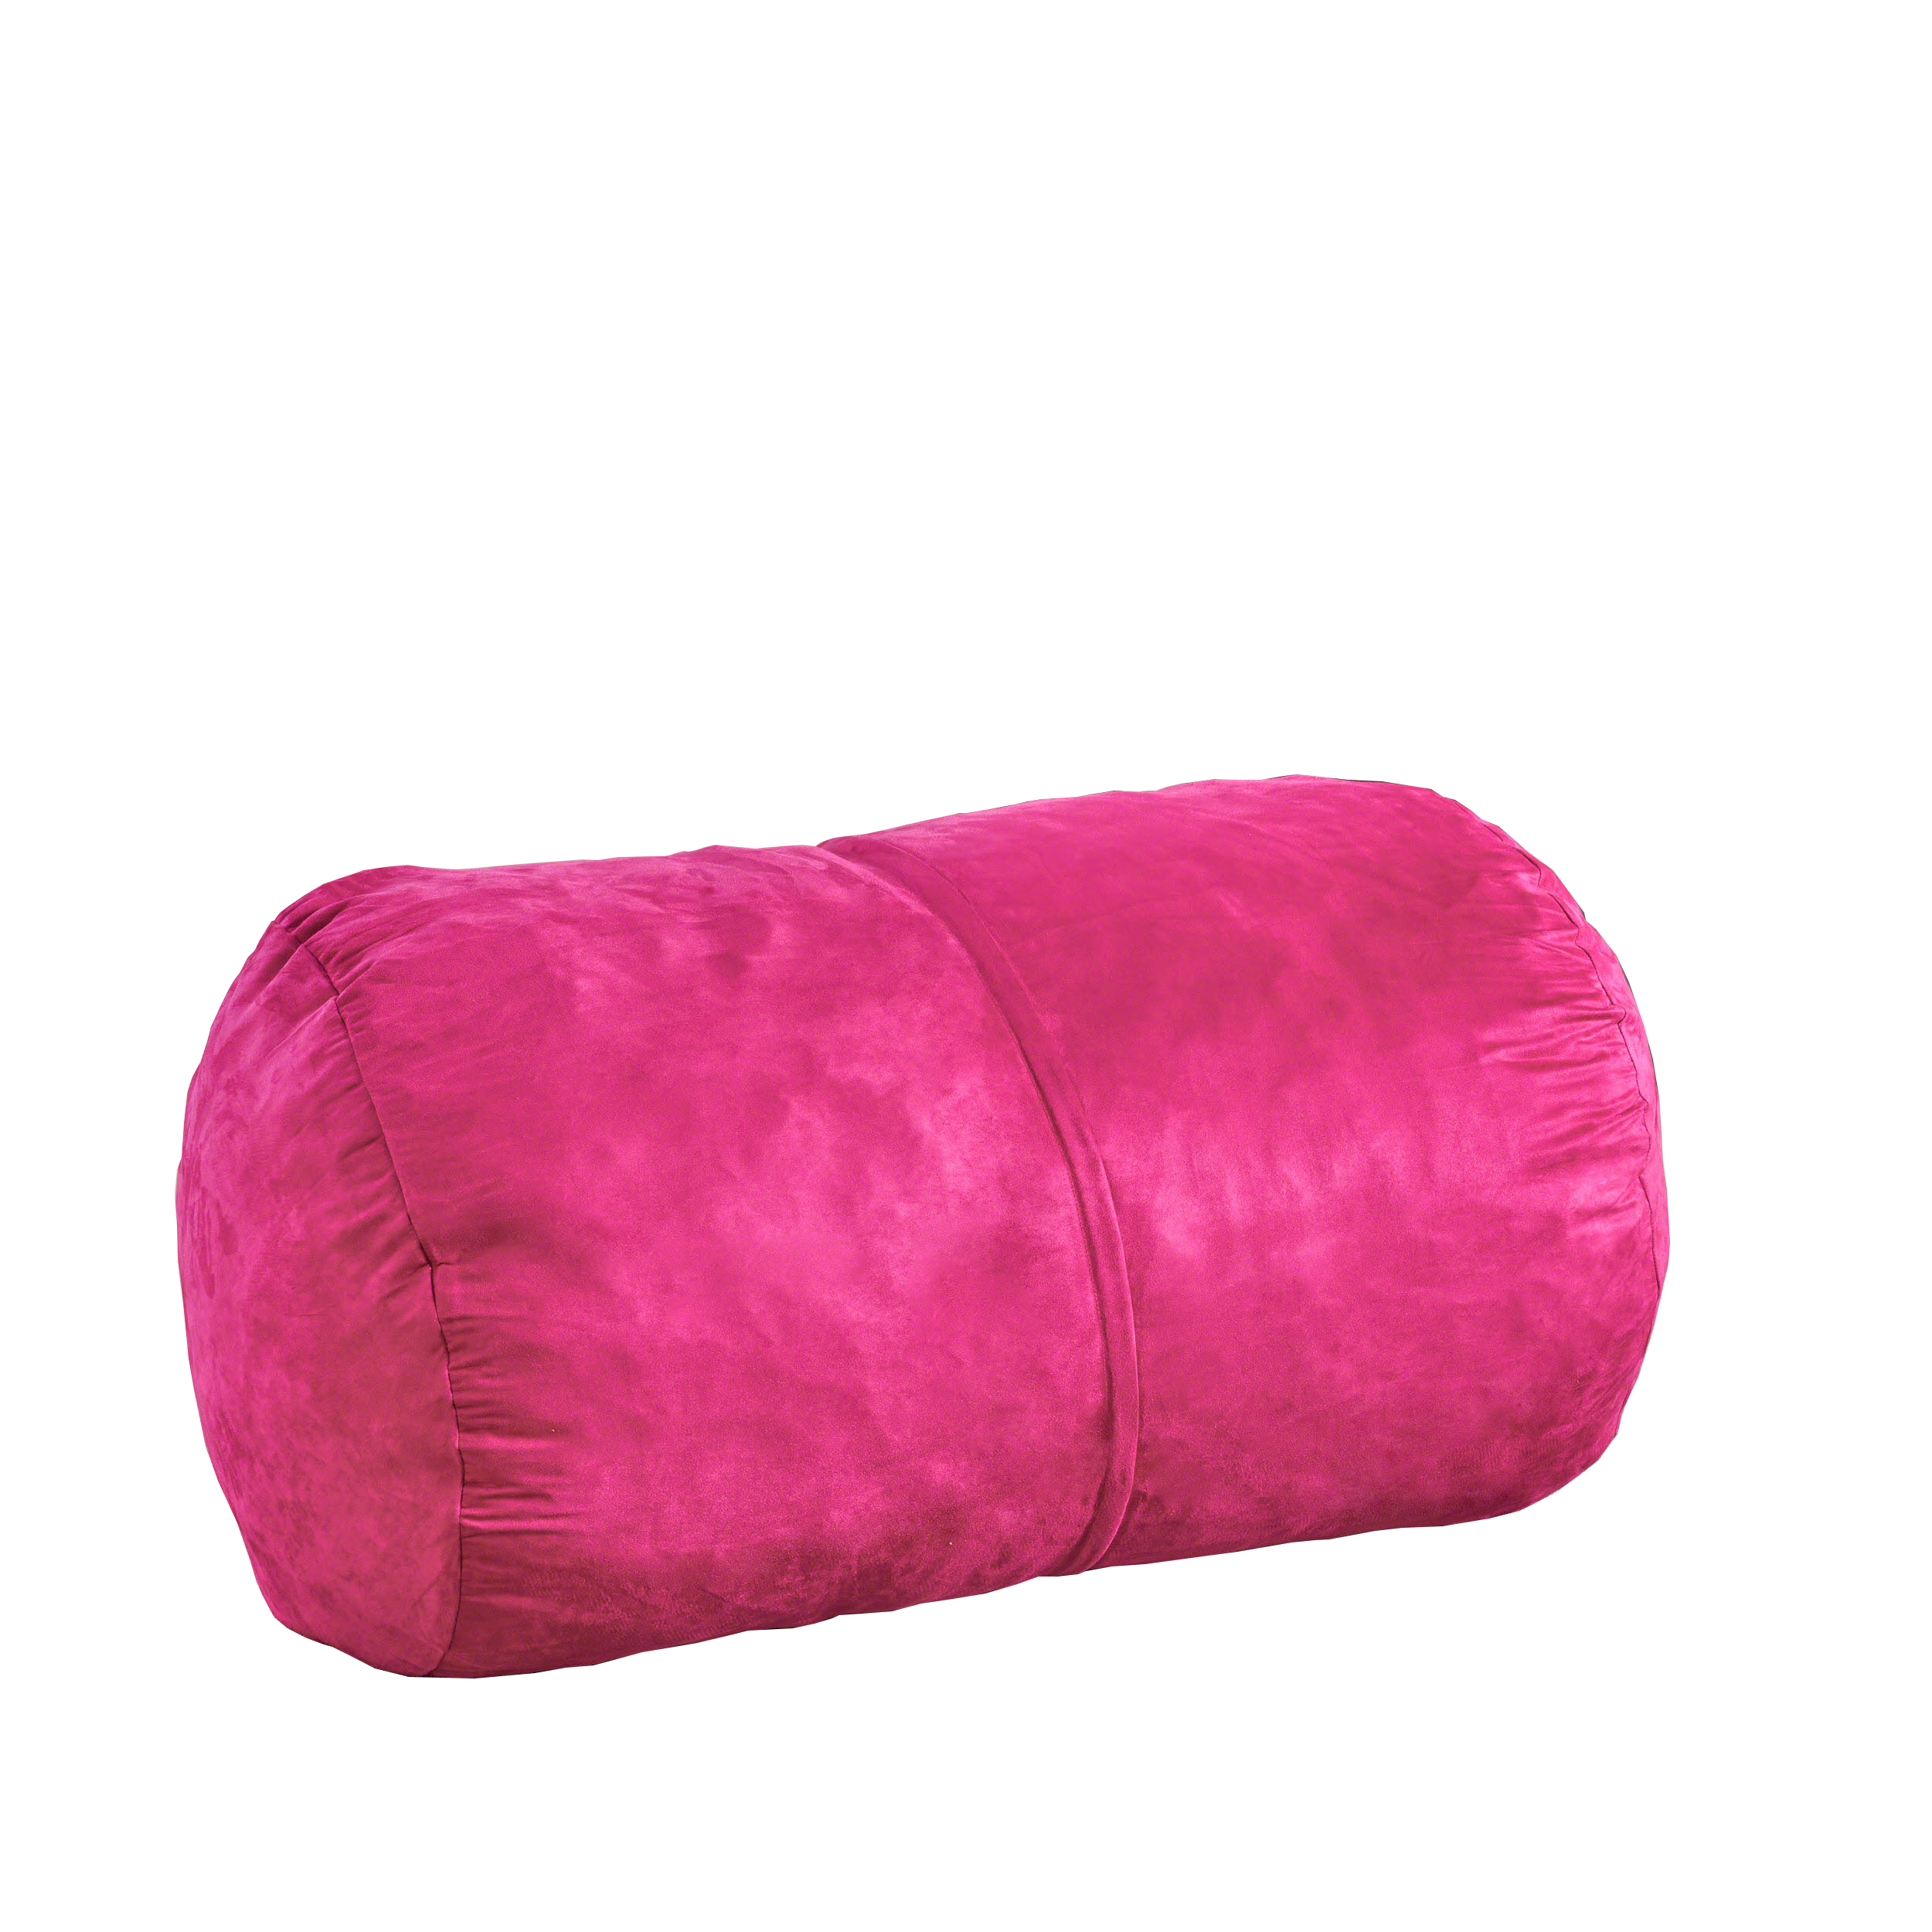 Genevieve Traditional 4 Foot Suede Bean Bag (Cover Only), Fushcia - image 4 of 6